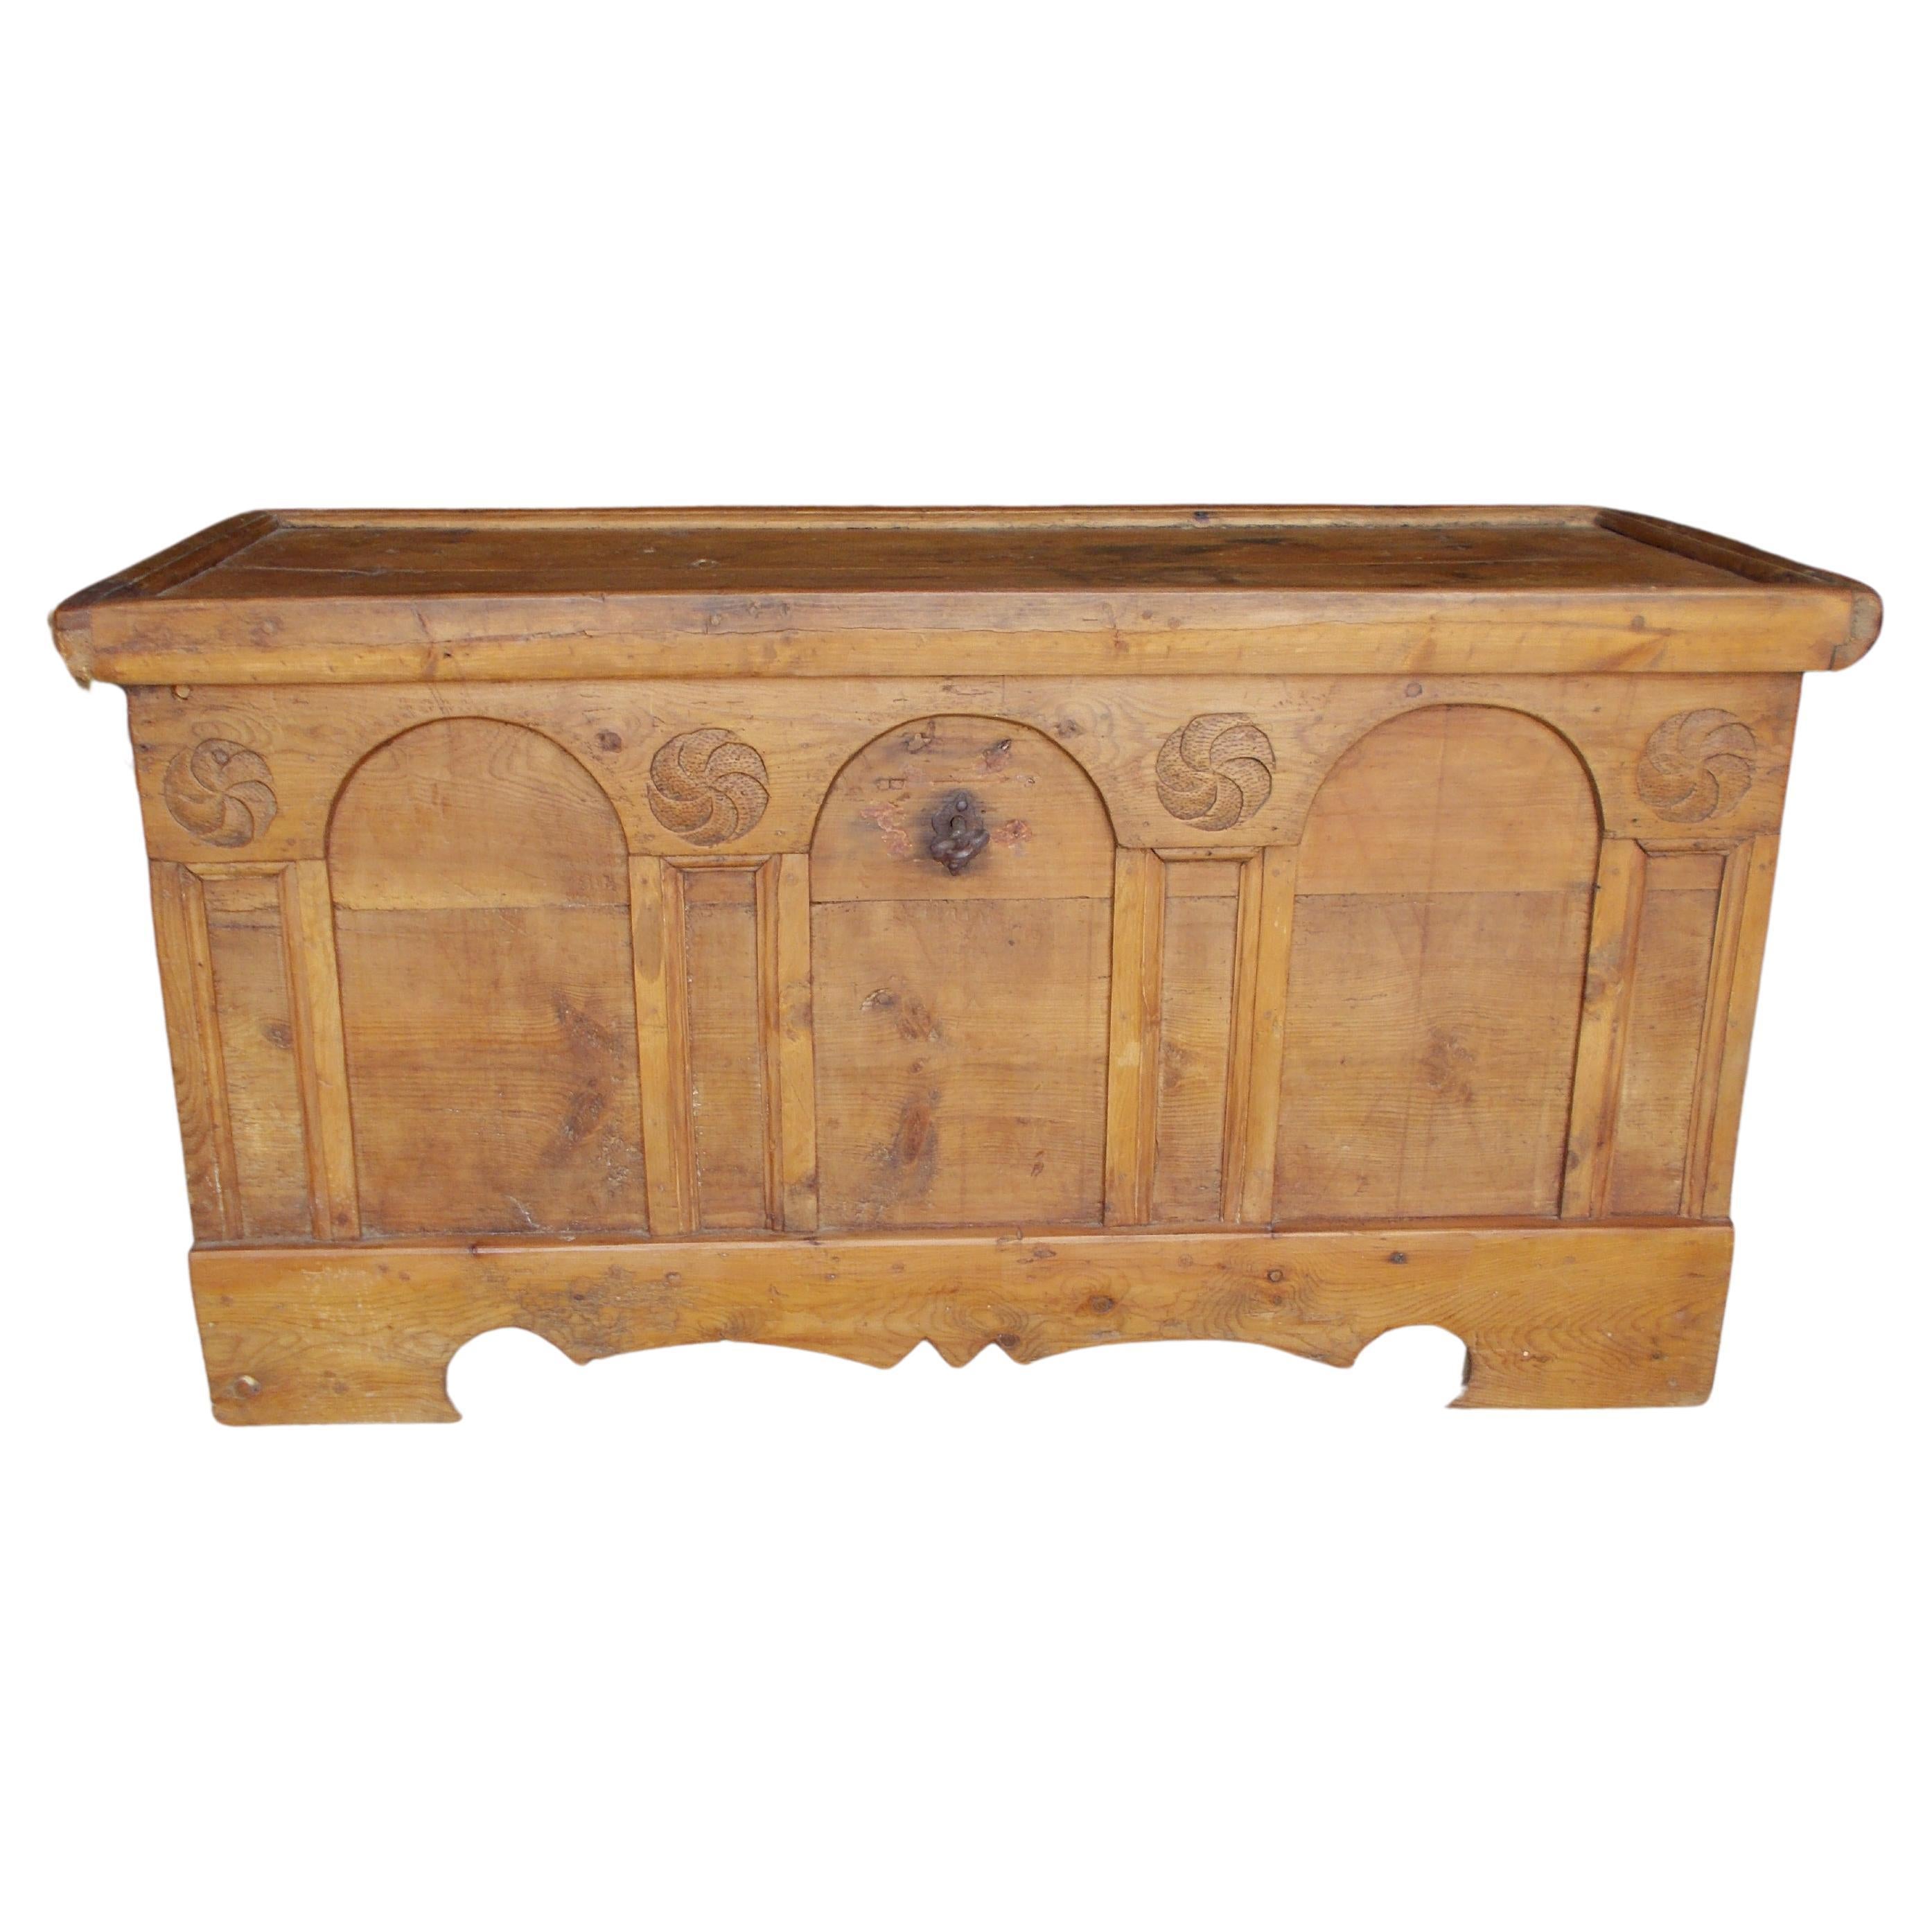 Stone pine wedding chest, up to the 1700s For Sale